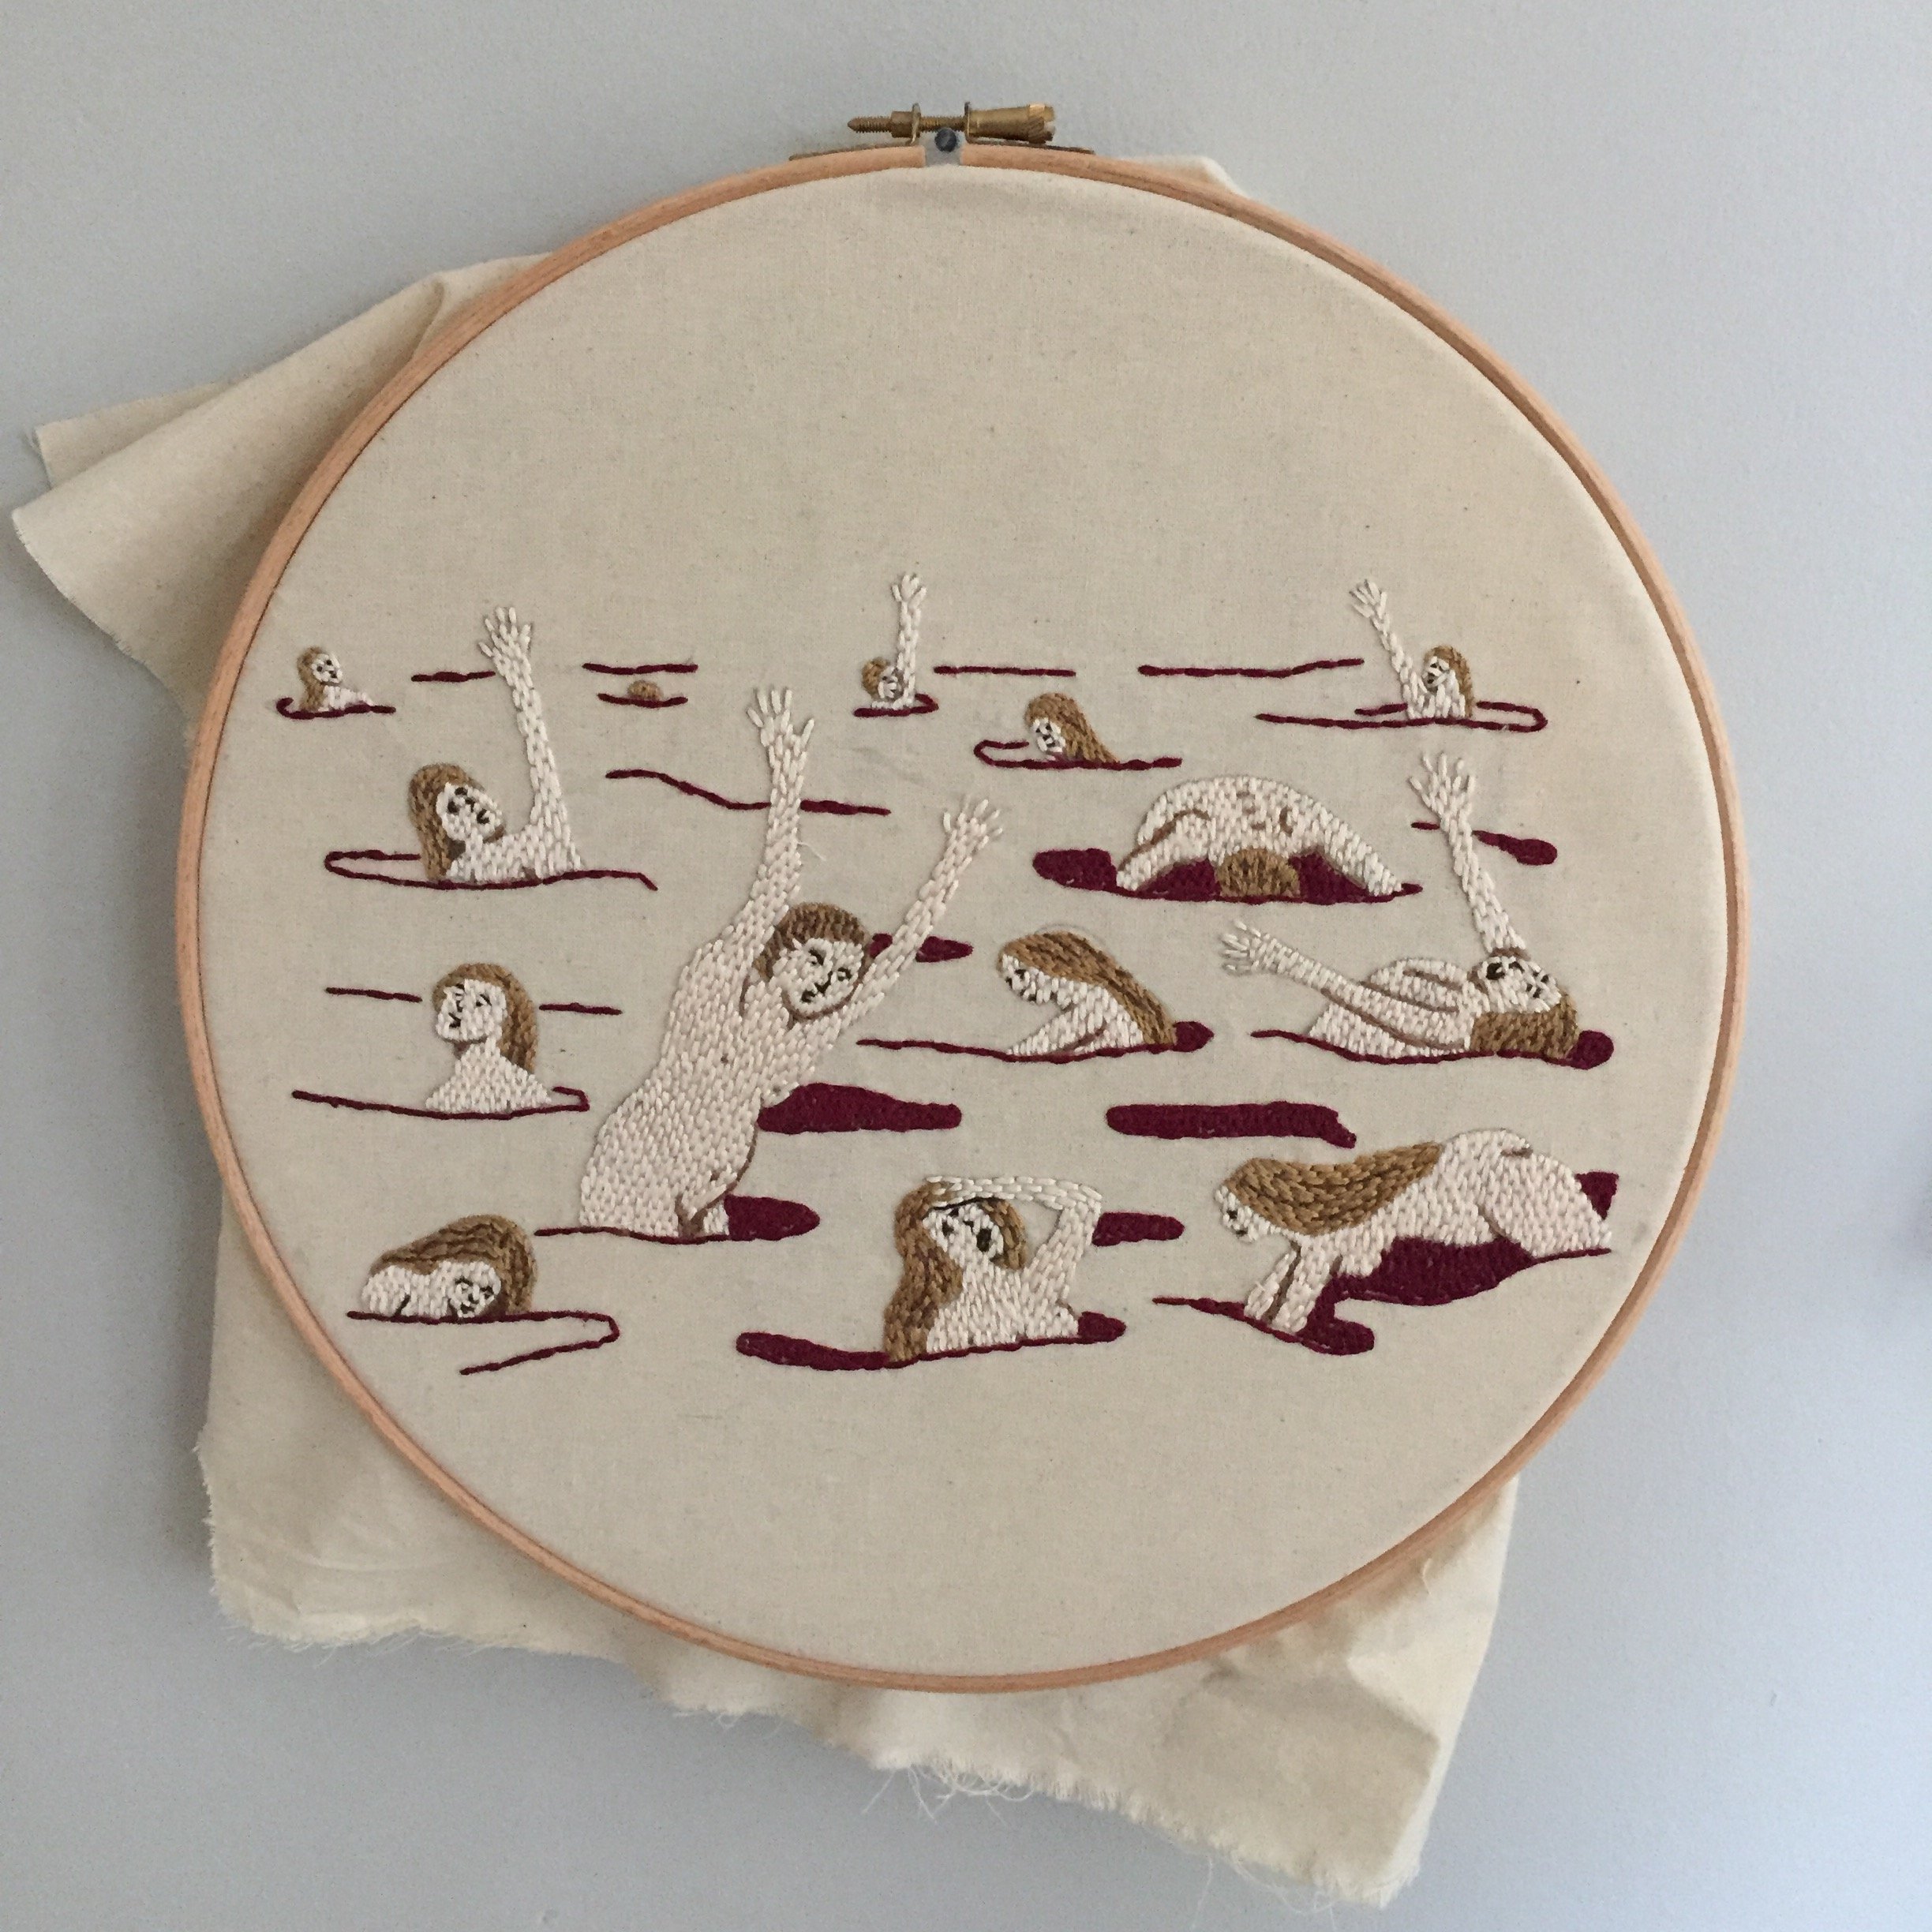 Embroidery from The Dancing Plague at the 155a Gallery